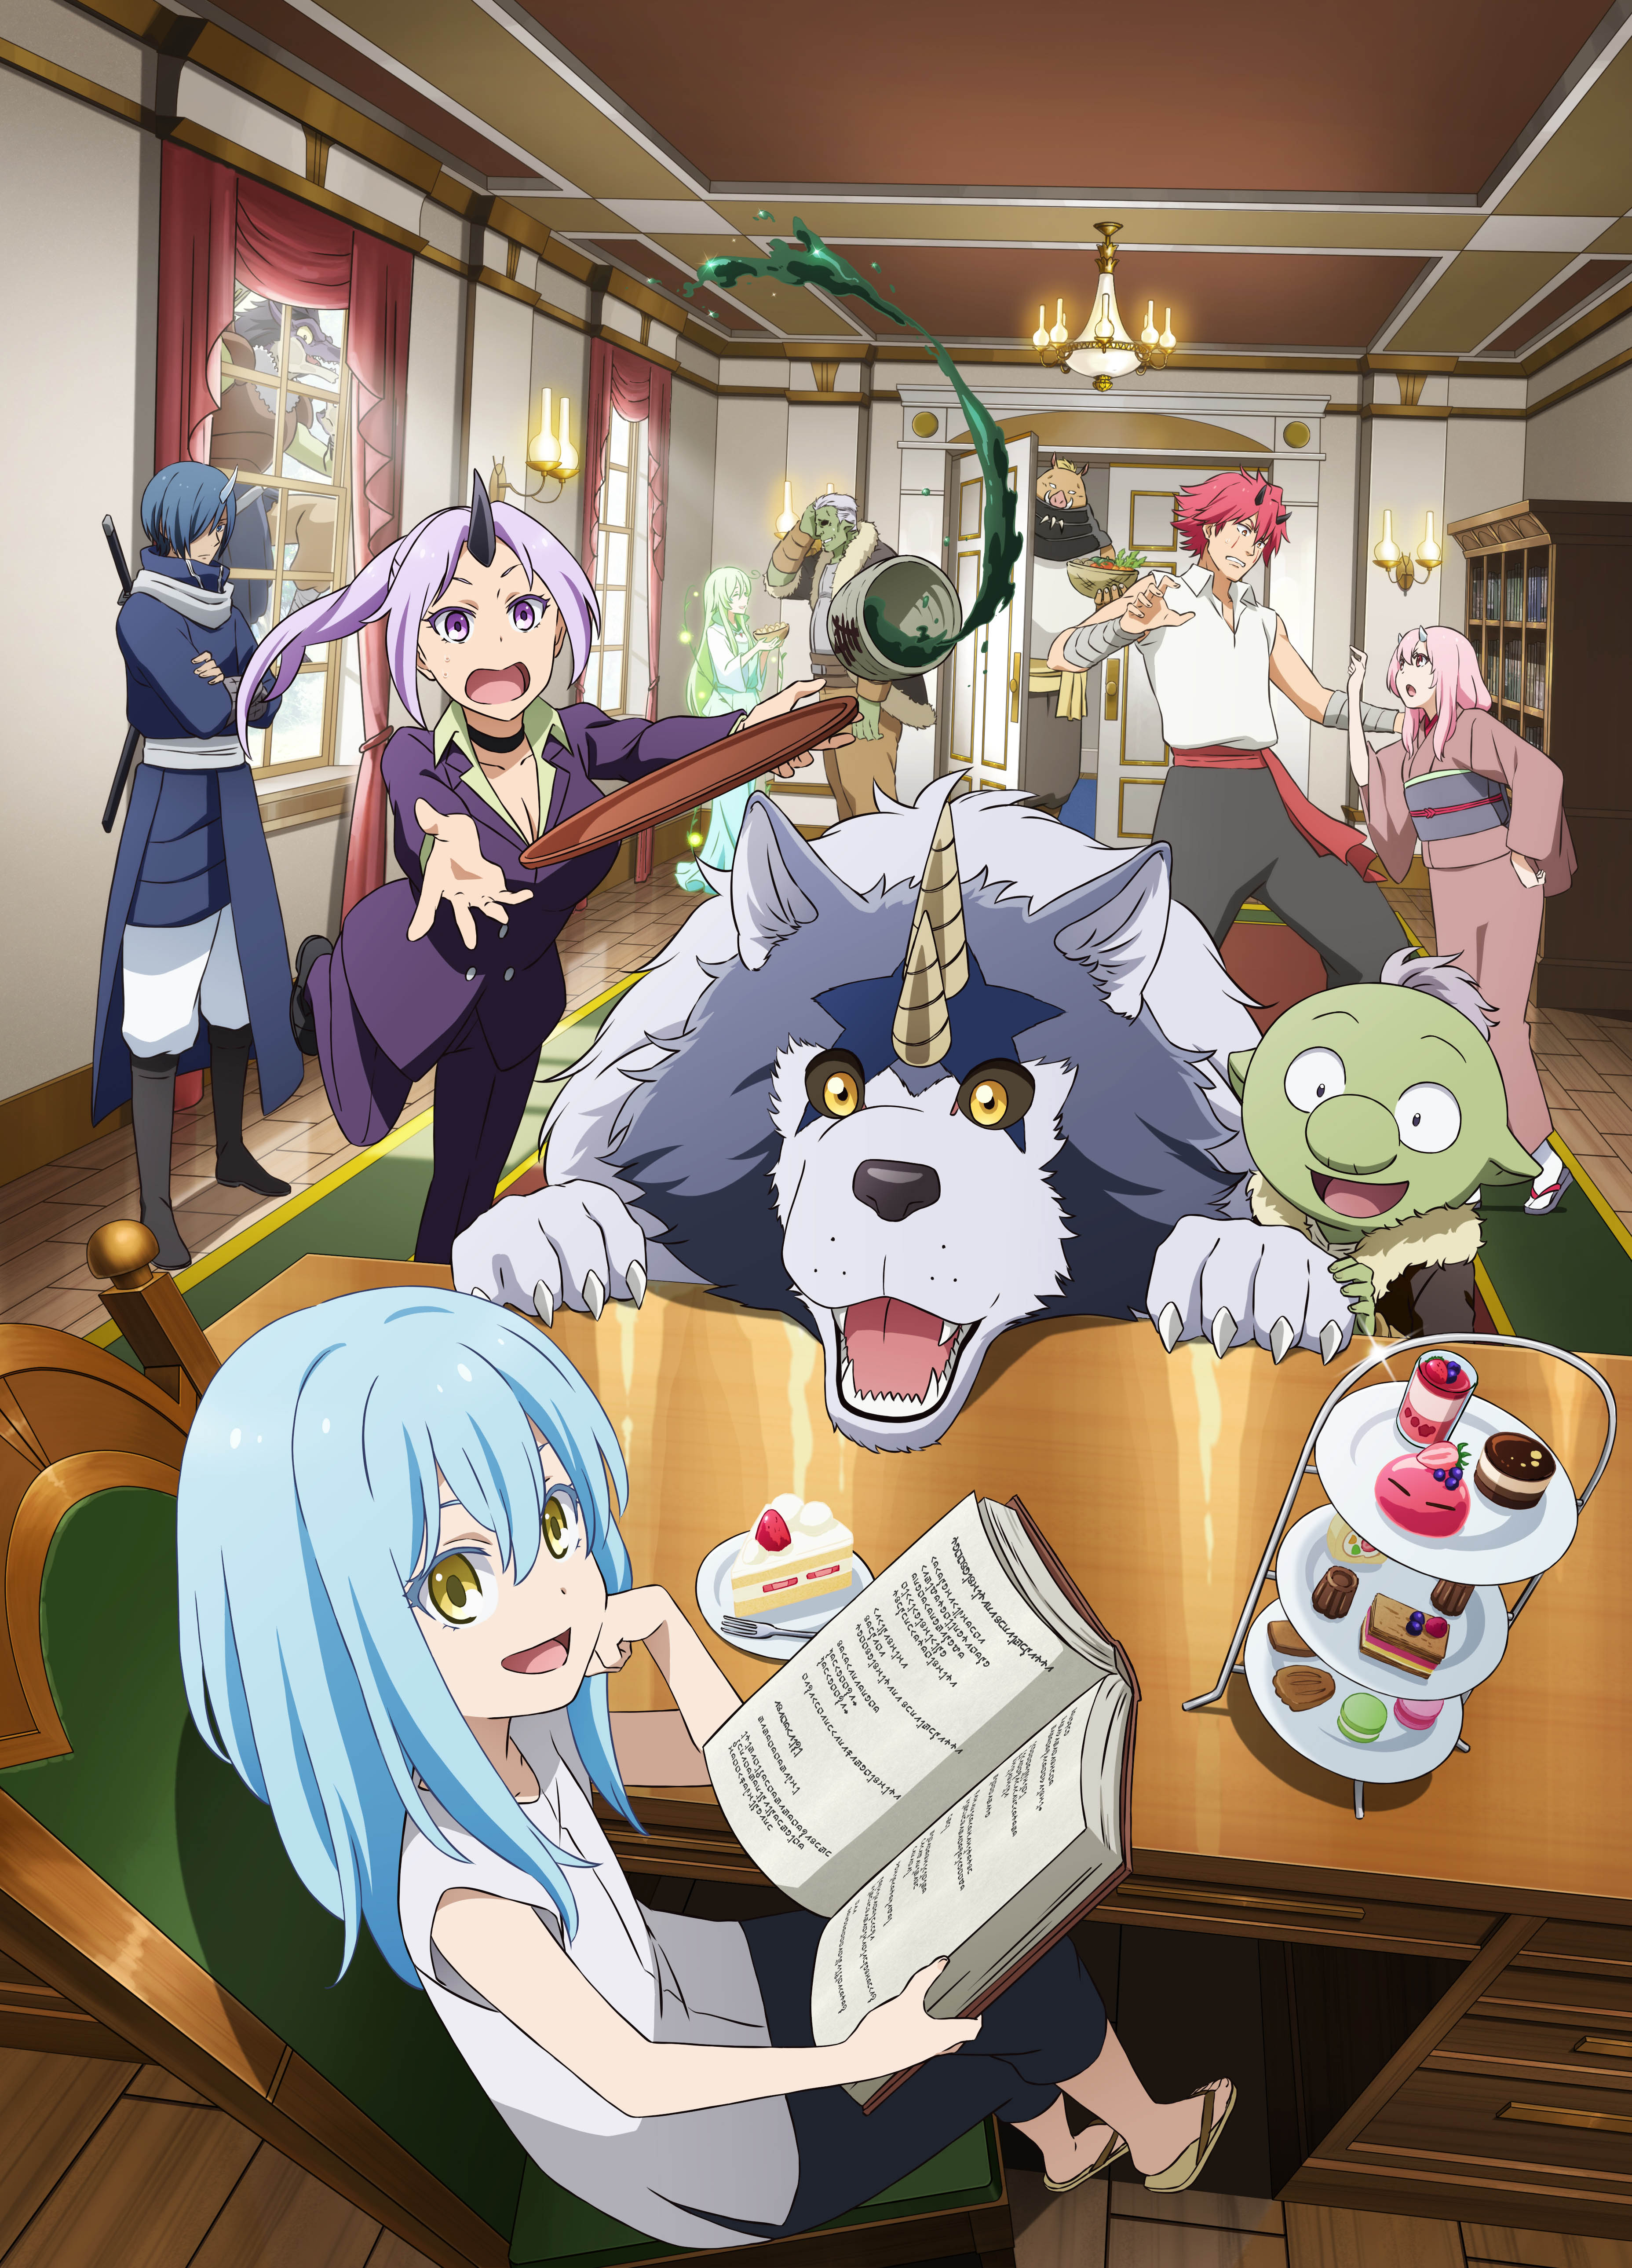 That Time I Got Reincarnated as a Slime: The Slime Diaries S1